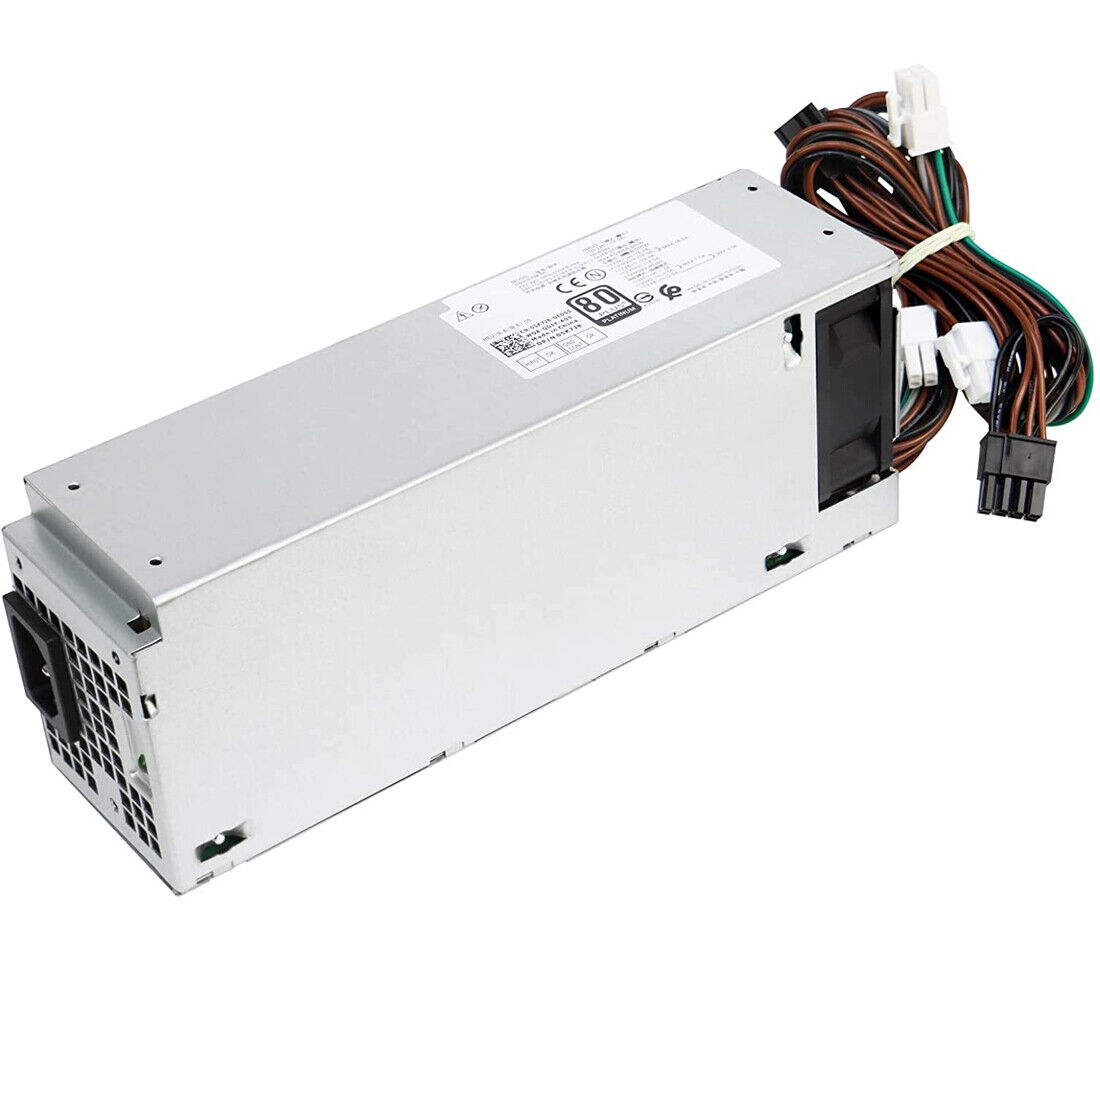 New For Dell G5 XPS 8940 7060 500W 5060 7080MT Power Supply PSU D500EPM-00 5K7J8